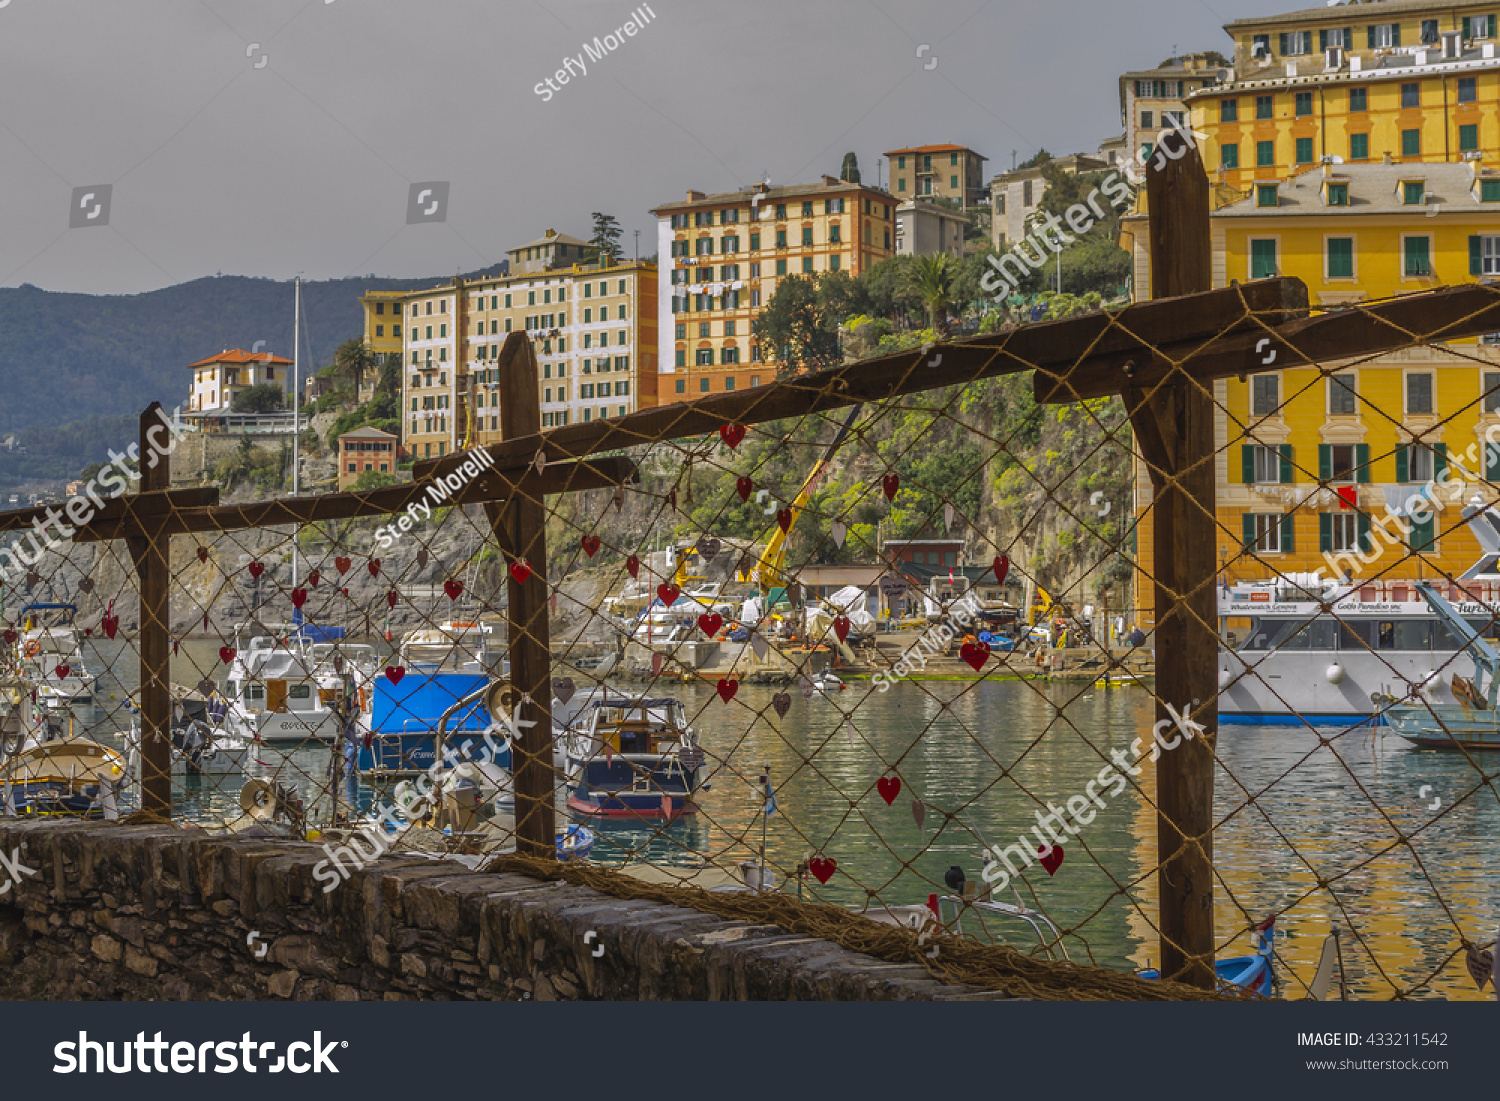 GENOA, LIGURIA, ITALY - April 3, 2016 : Panorama of the port of Camogli seen through a fishing net decorated with red paper hearts. #433211542